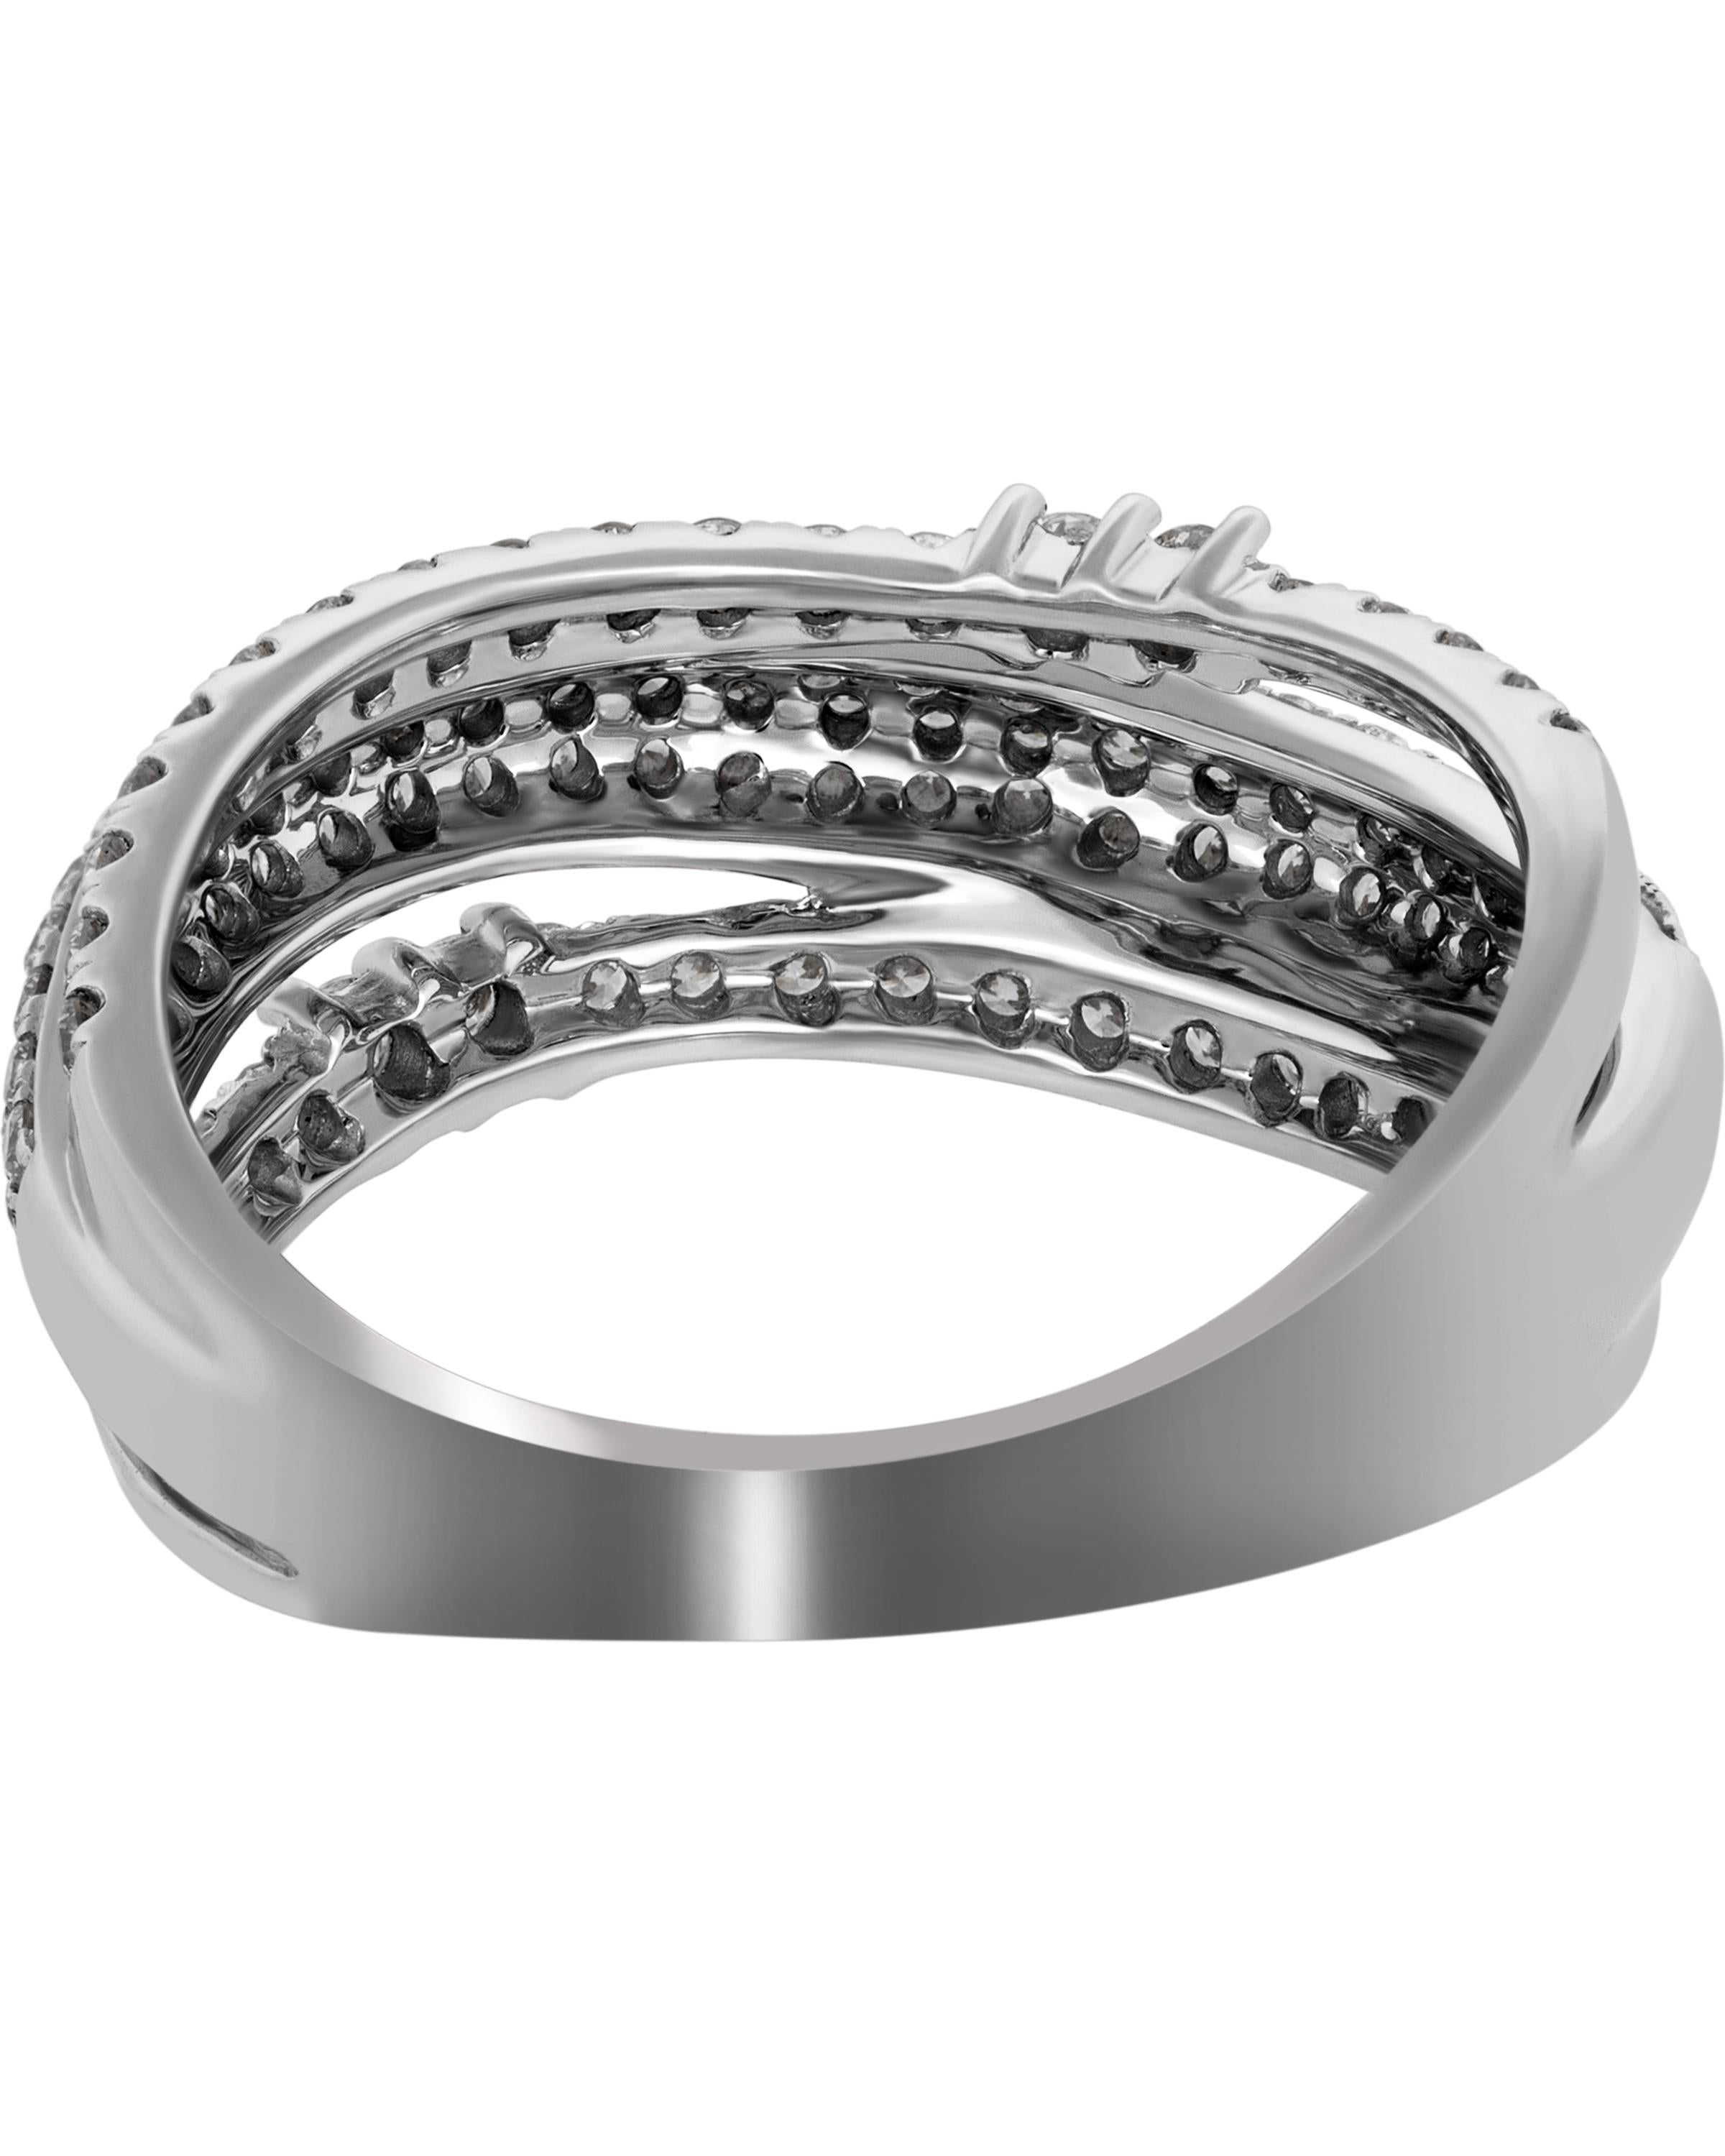 This brilliant Piero Milano 18K White Gold Curved Ring features shimmering French pave arches detailed with diamonds in a shared prong setting 0.77ct. tw. The ring size is 6.5 (53.1). The Band Width is 8.1mm. The Weight is 4.6g. Diamond Color: G-H.